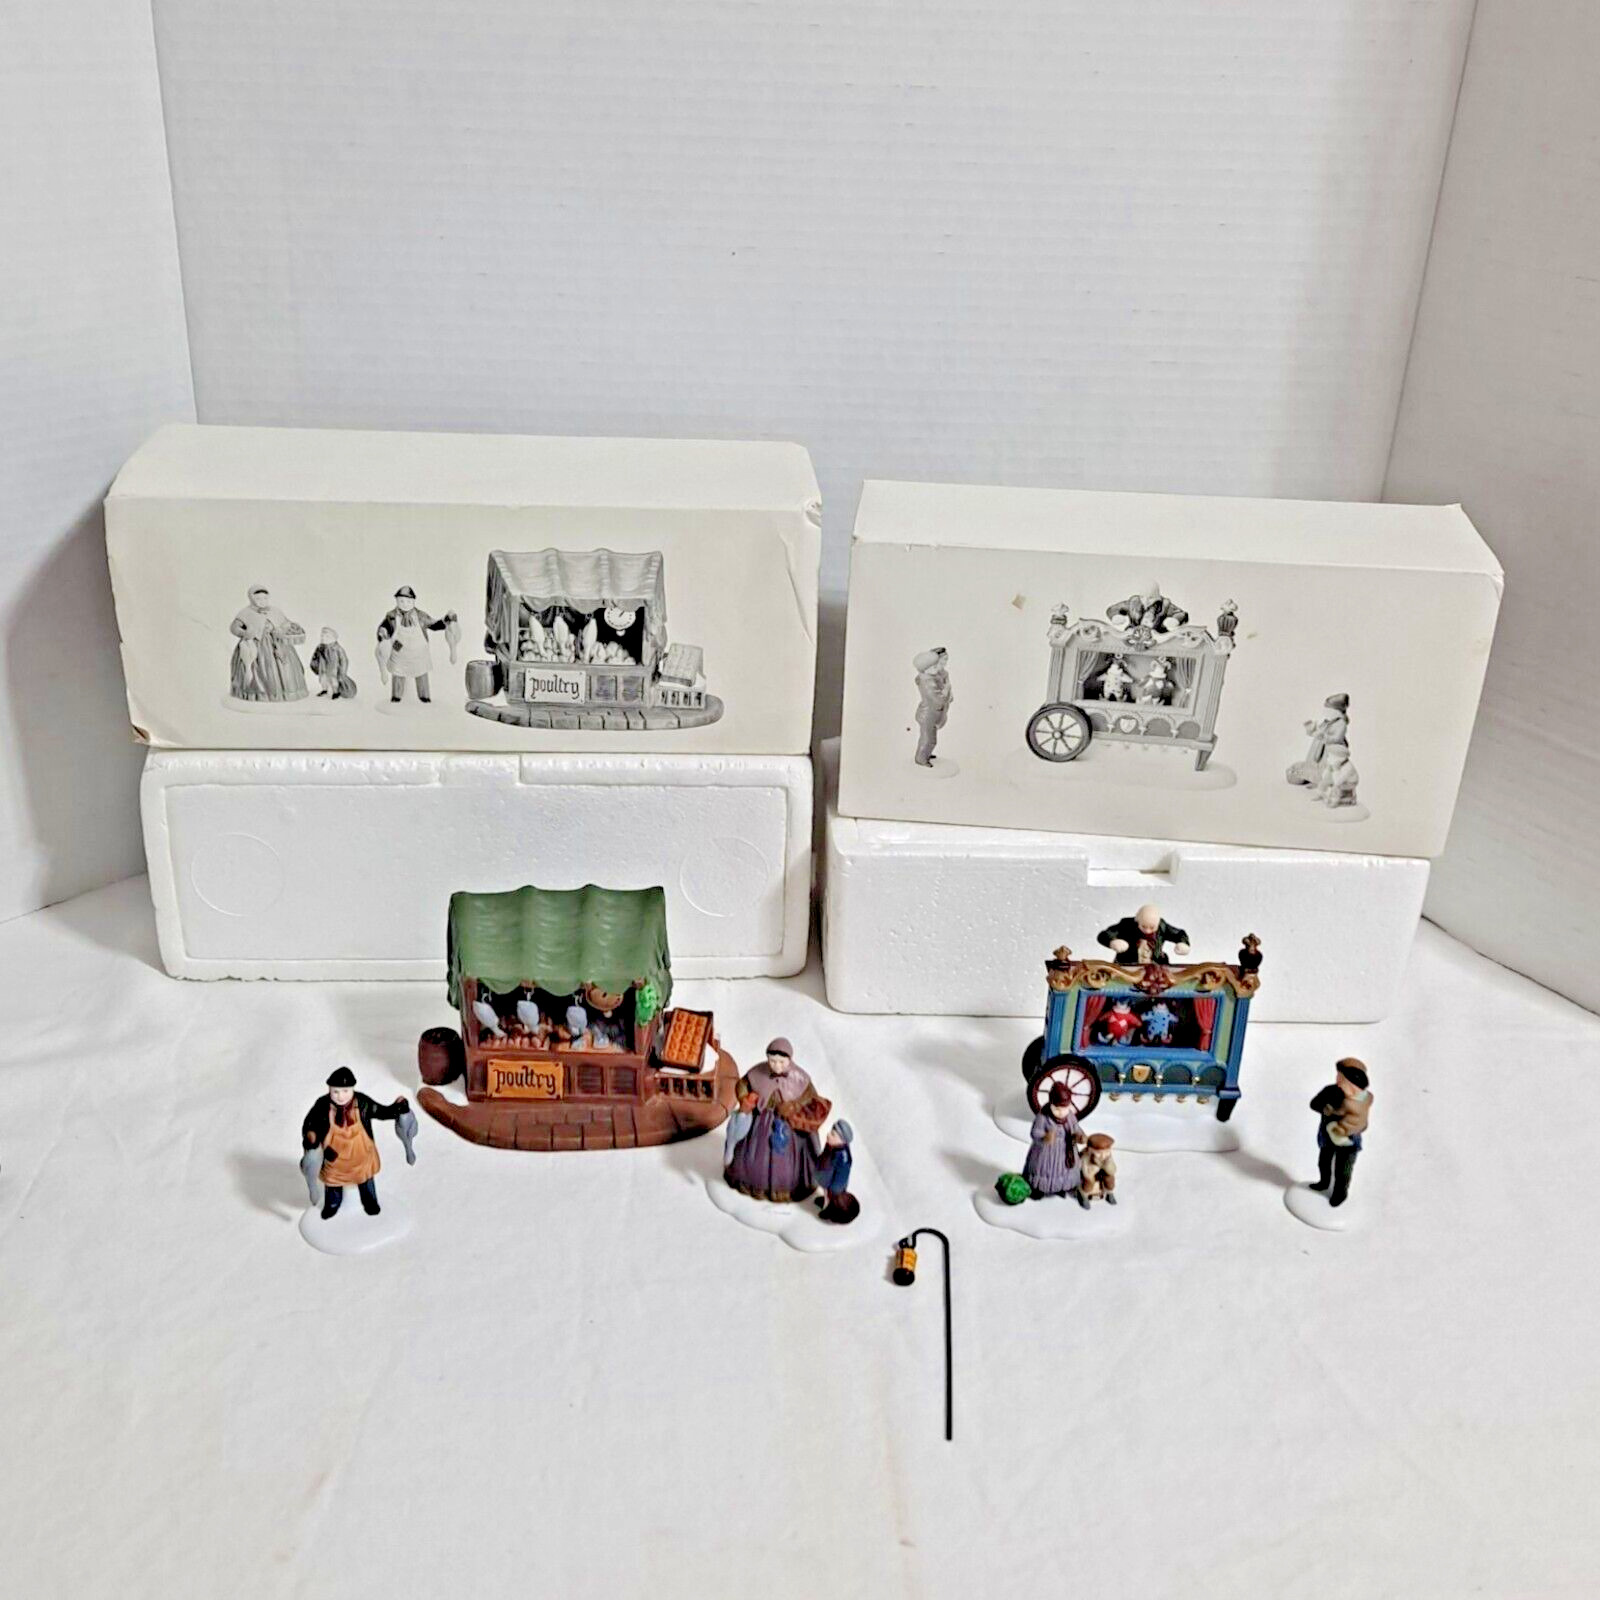 Dept 56 The Old Puppeteer Poultry Market Heritage Village Collection Boxes Foam